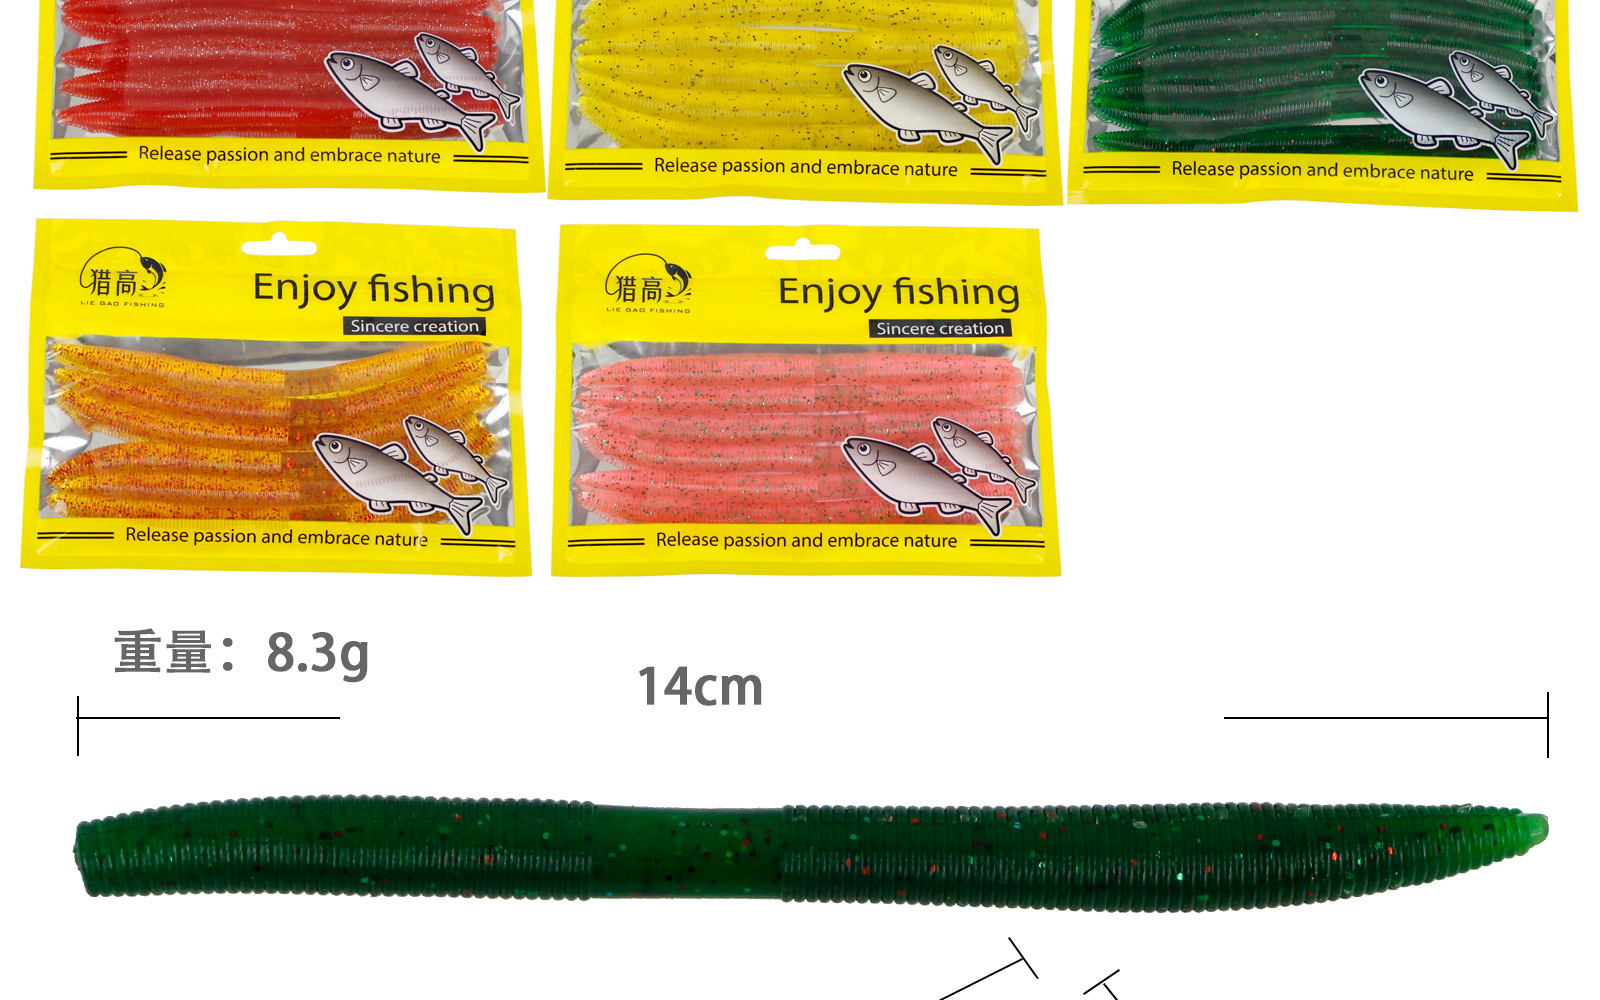 6 Pcs Soft Worms Lures Soft Baits Fresh Water Bass Swimbait Tackle Gear